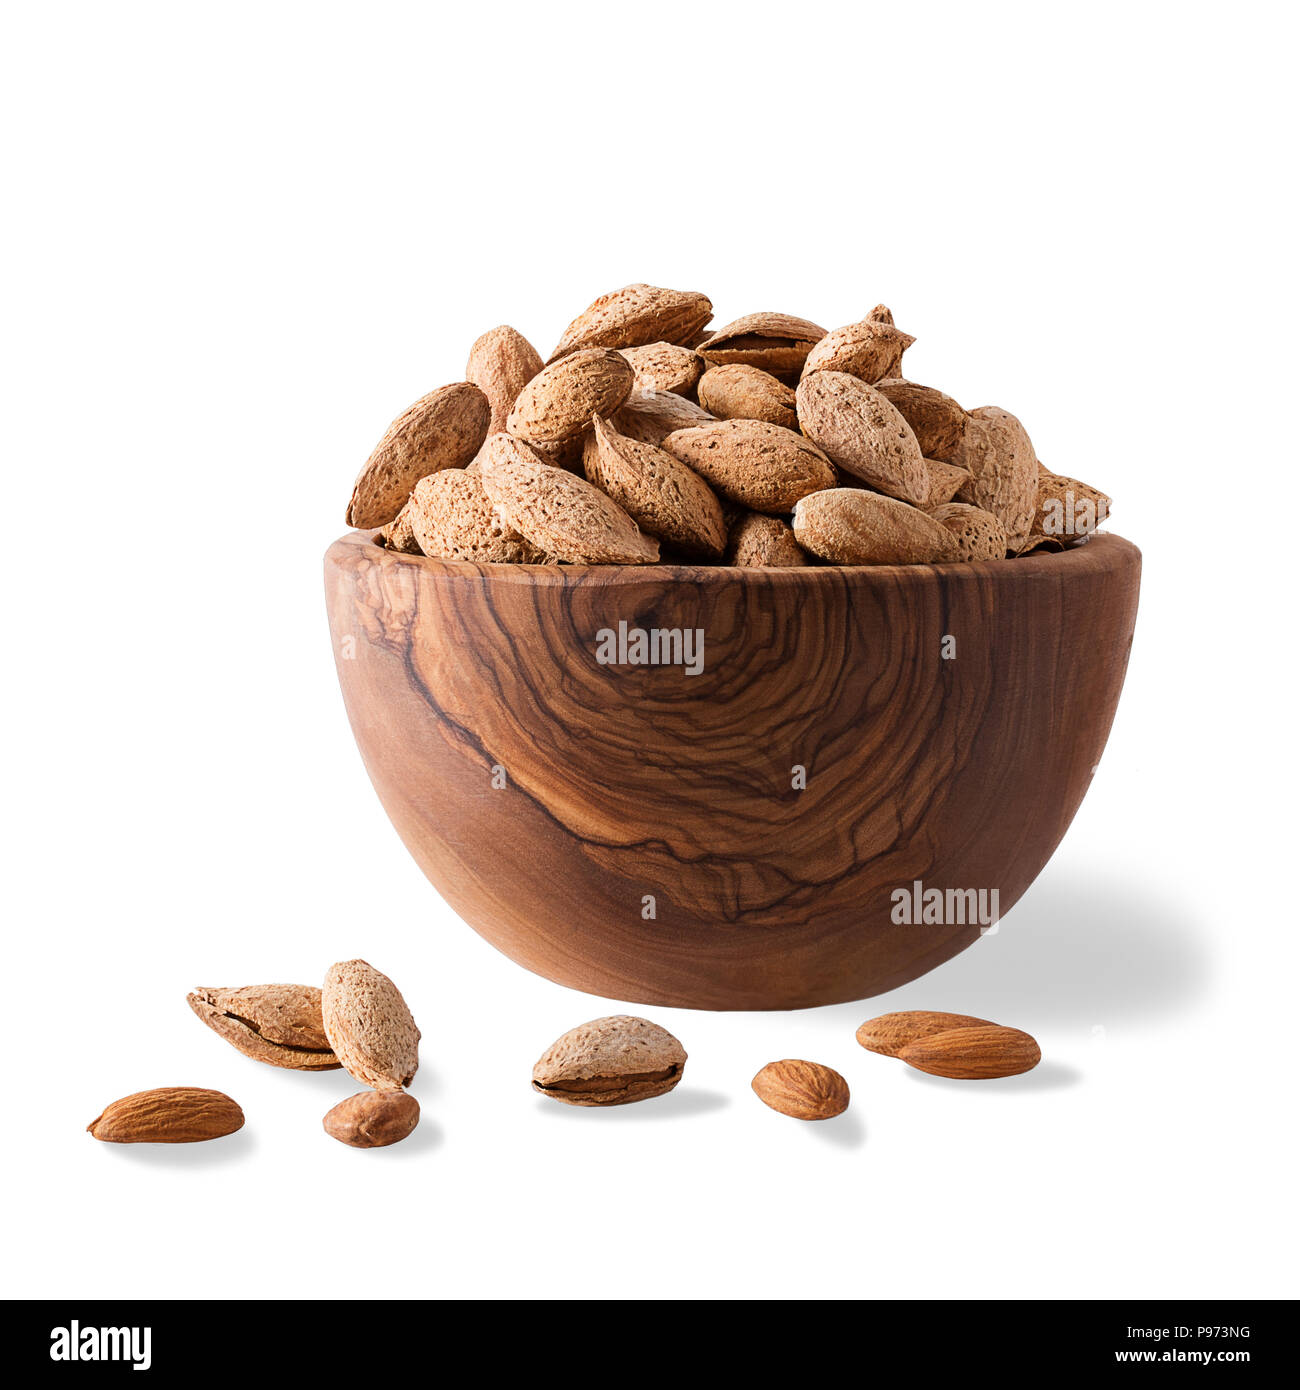 Bowl of almonds on white. Almond nuts with shell ina wood bowl Isolated on white background. Stock Photo